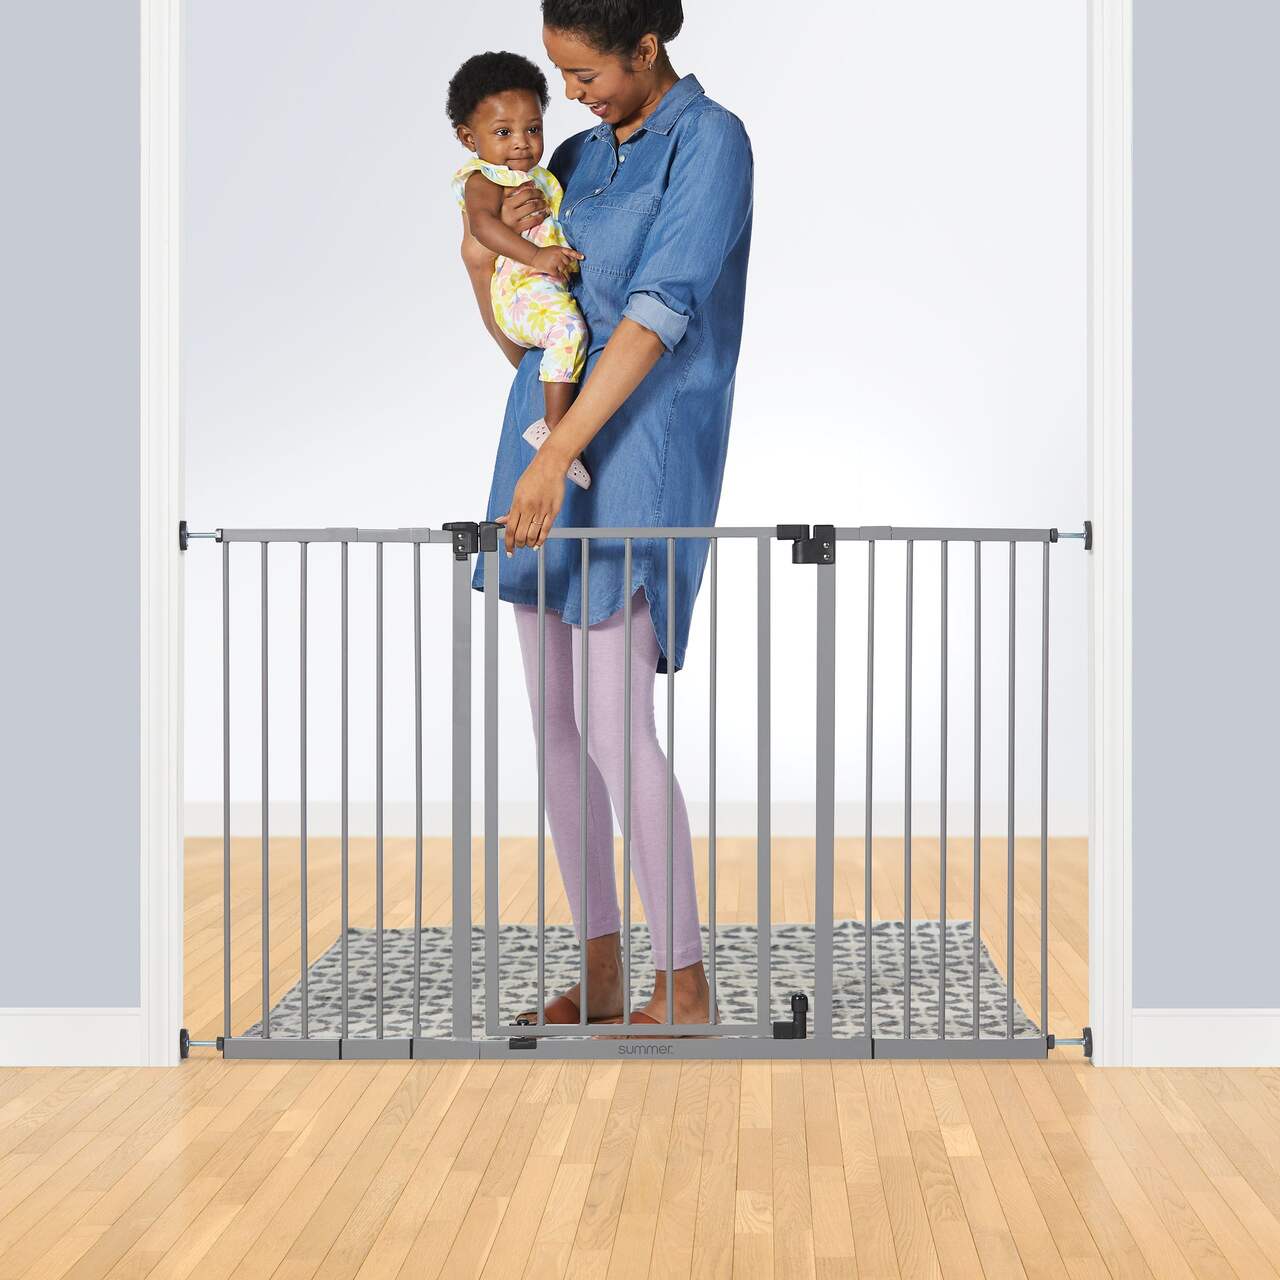 Summer Infant Extra Tall & Wide Safety Pet and Baby Gate, 29.5-53 Wide,  38 Tall, Pressure or Hardware Mounted, Install on Wall or Banister in